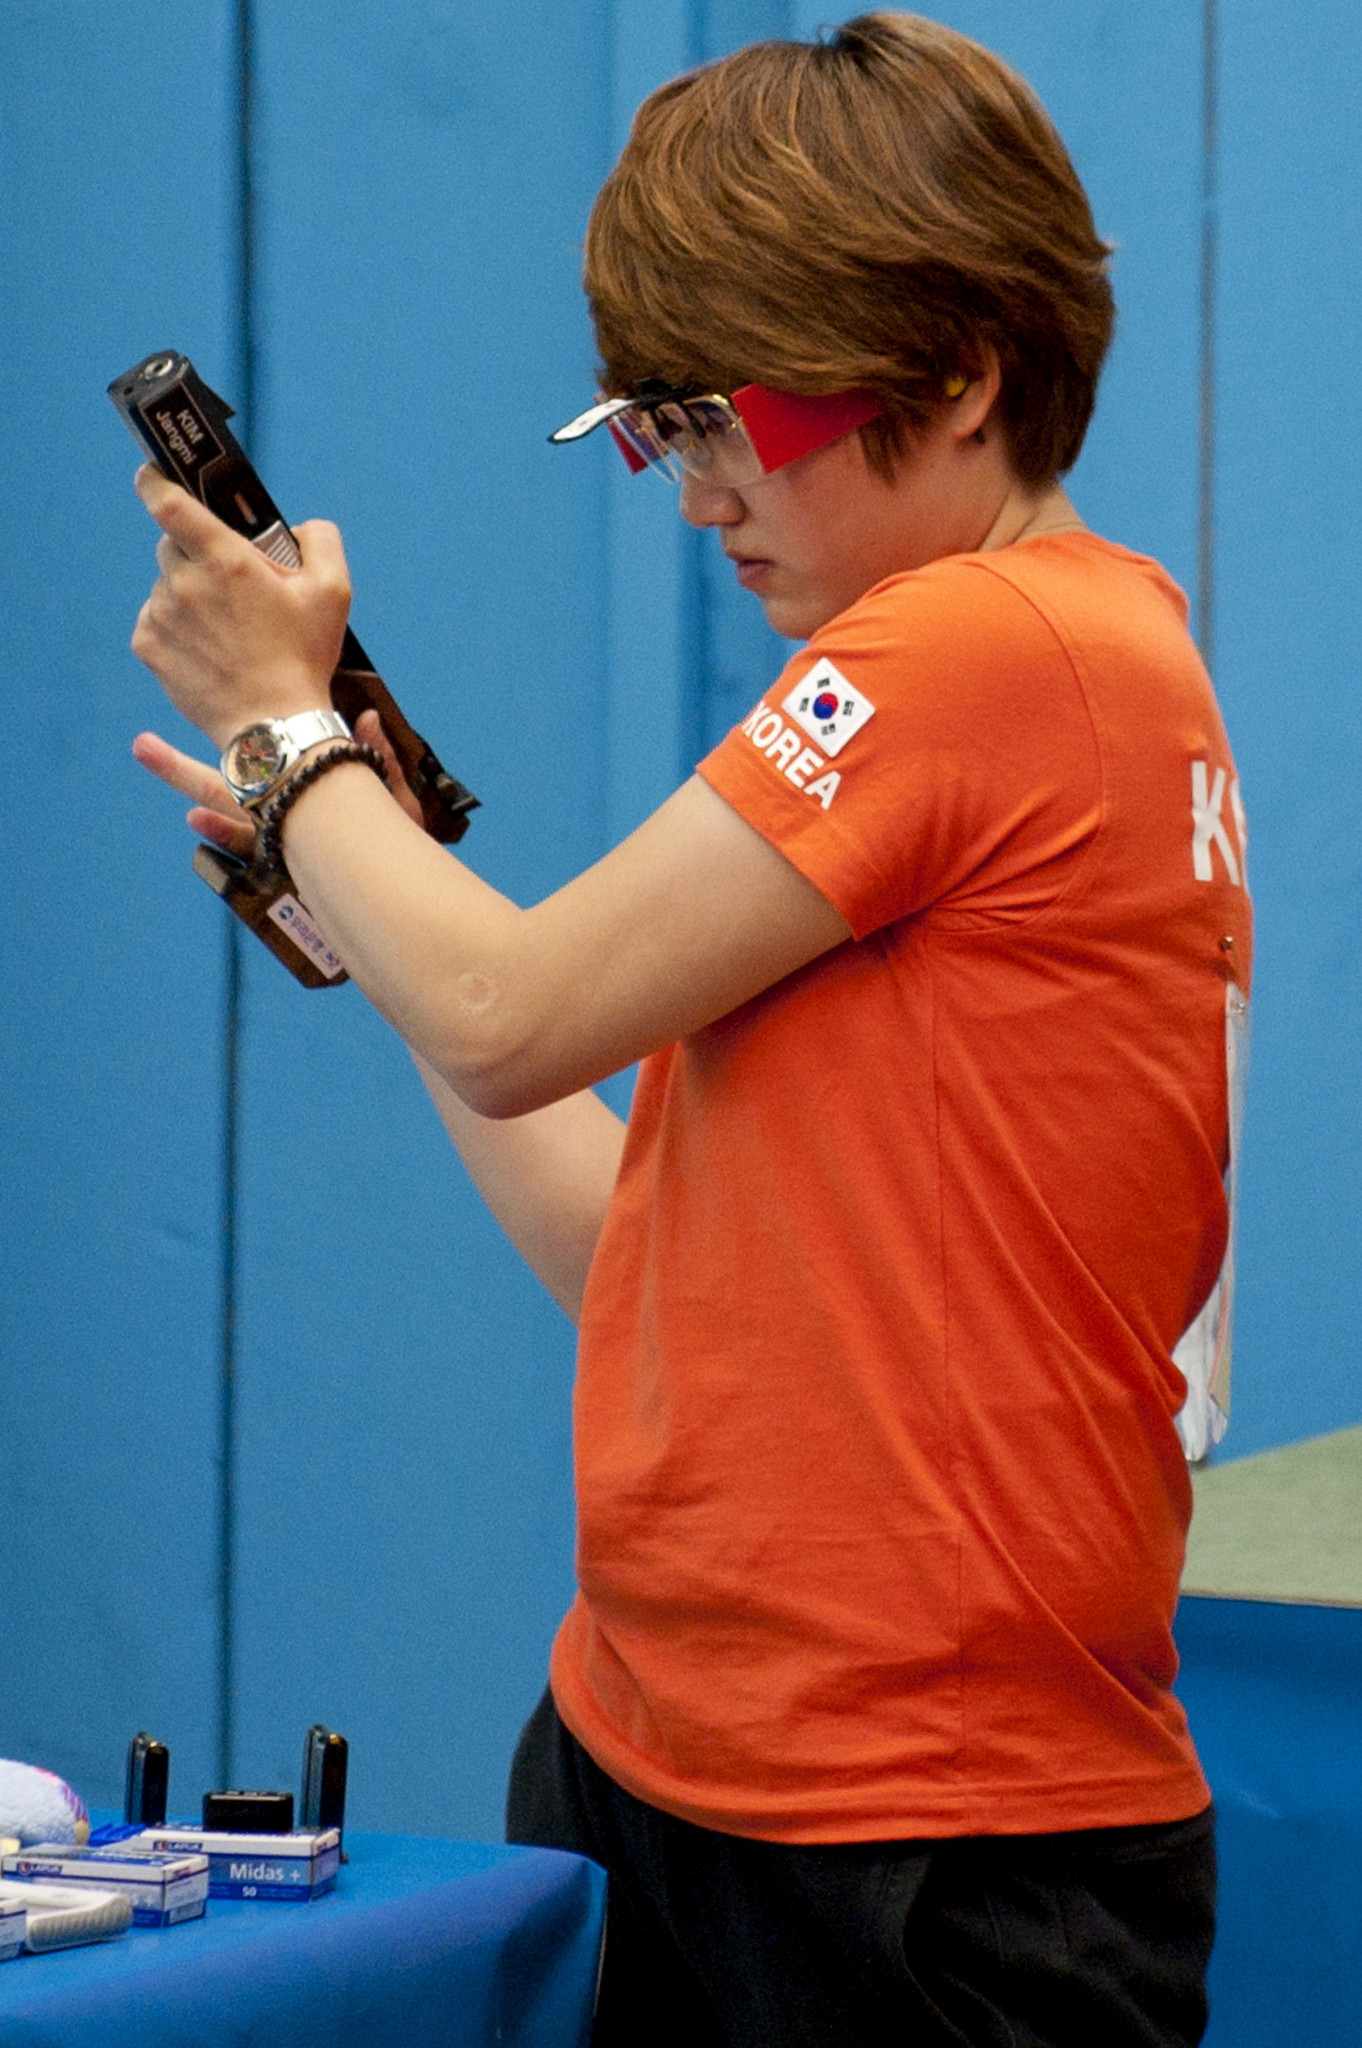 South Korea's Kim Jangmi topped the women's 25 metres pistol qualification standings at the Asian Shooting Championships in Doha today ©Getty Images